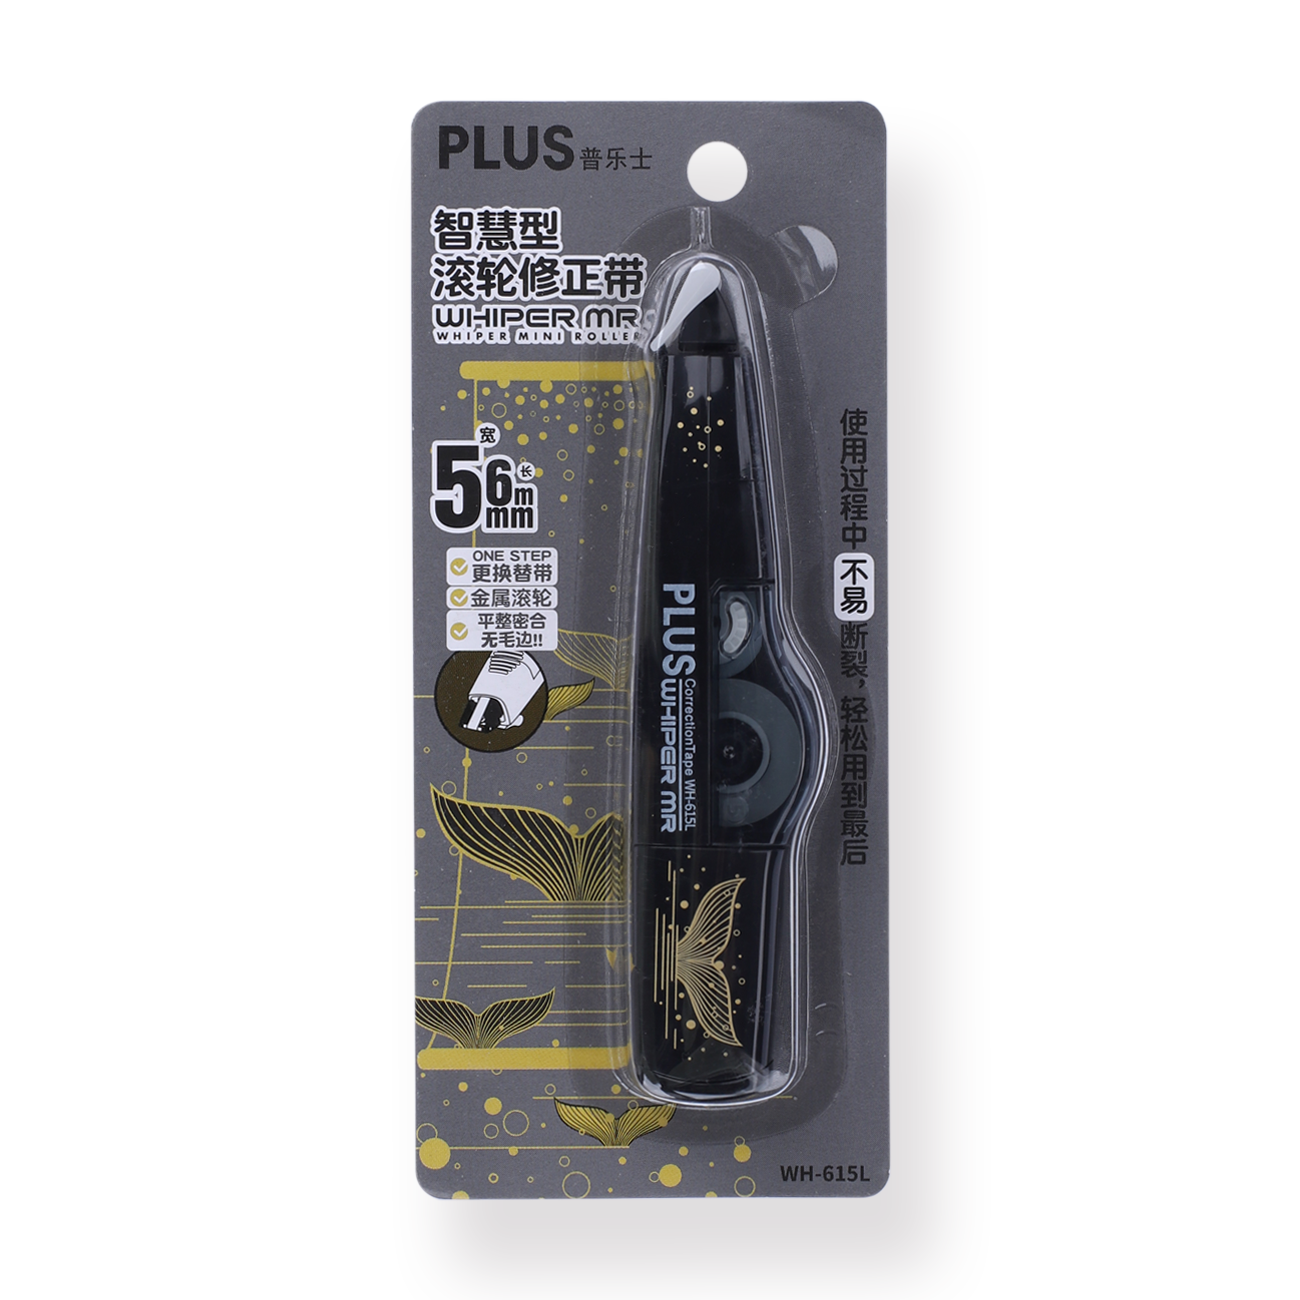 Plus Whiper Mr Limited Edition Correction Tape - Black Gold Series - Whale Tail - Stationery Pal